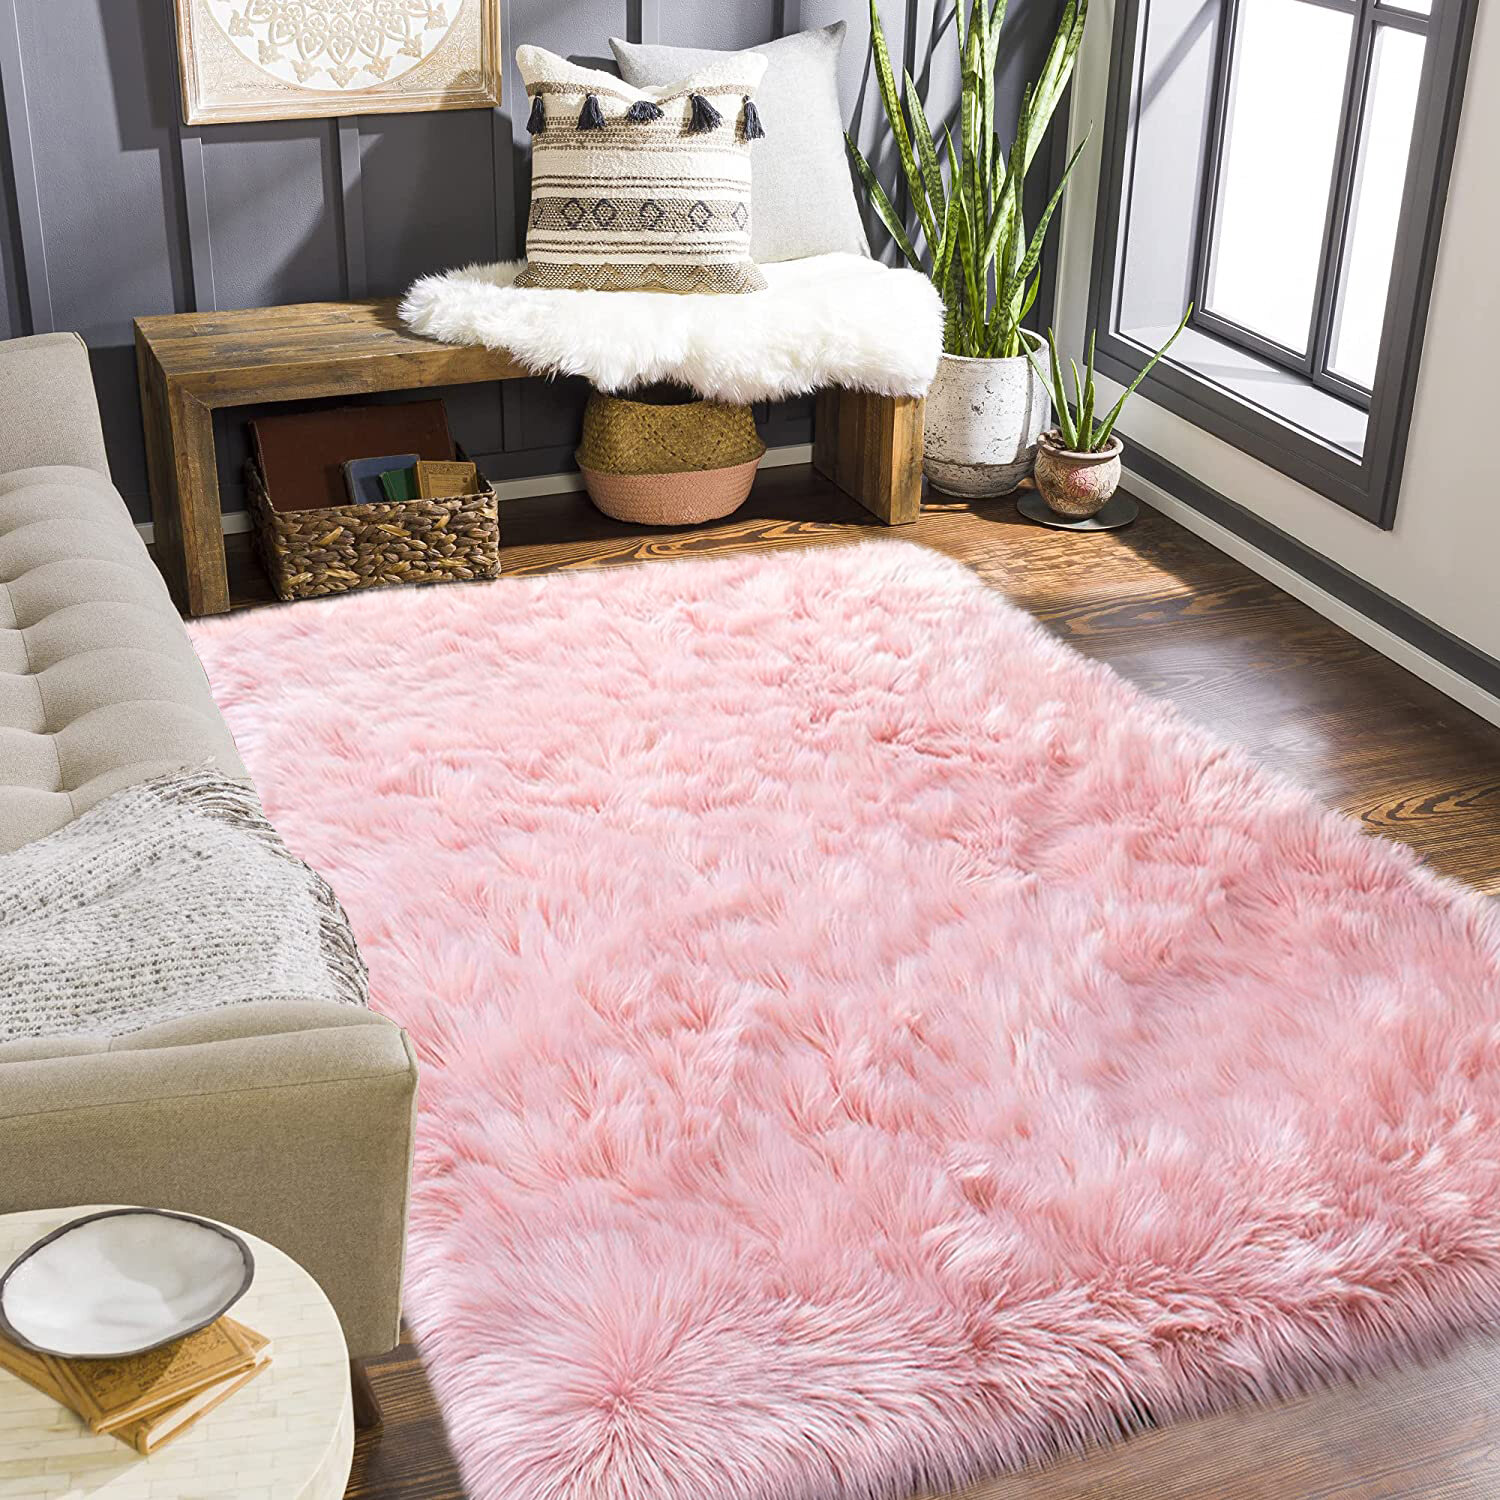 Machine Washable Area Rug for Bedroom, Dorm Room, Small Fluffy